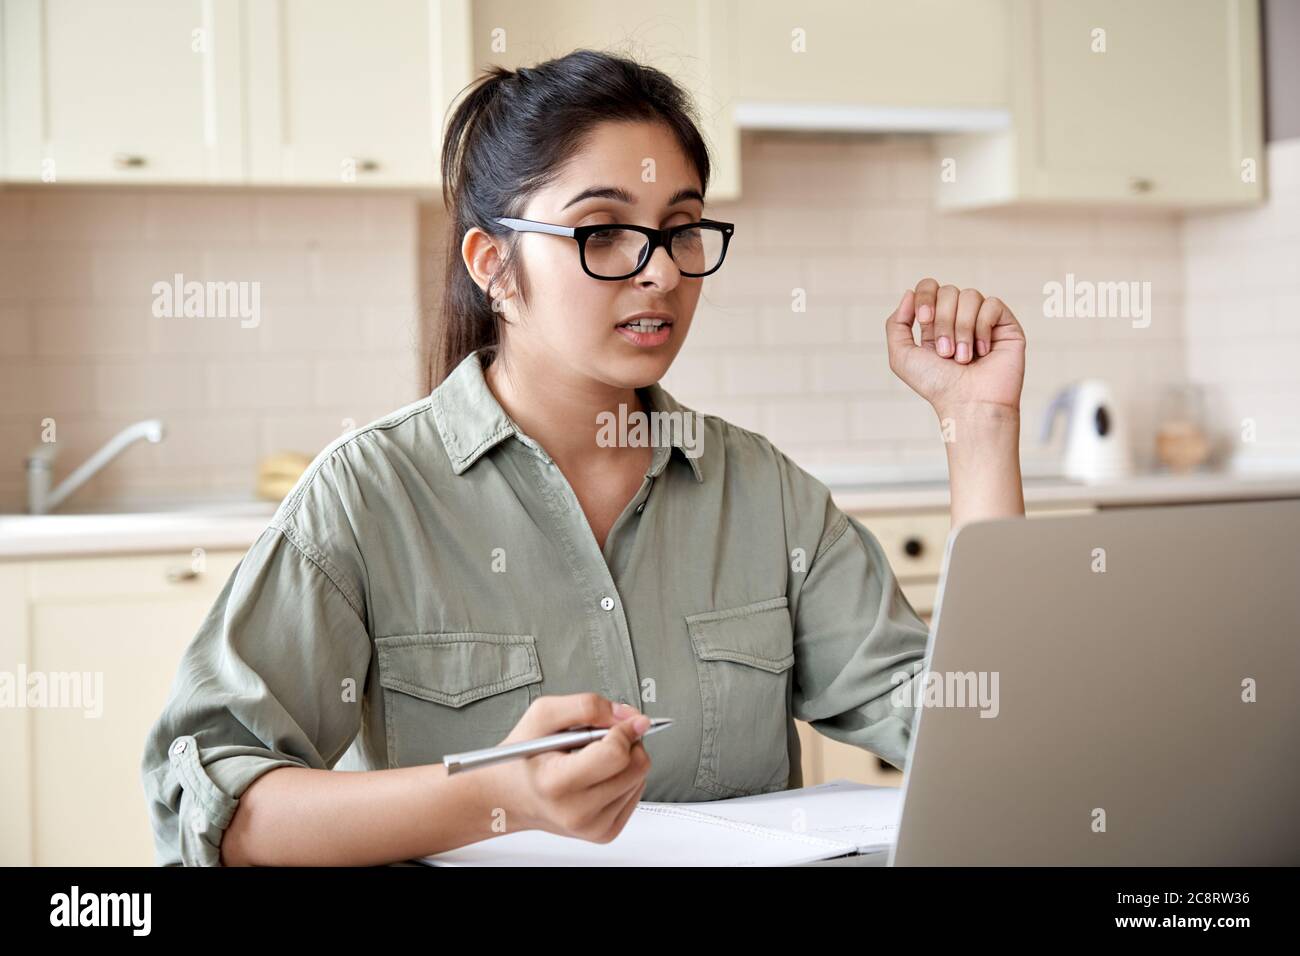 Indian woman teacher or student watching webinar or making video call. Stock Photo